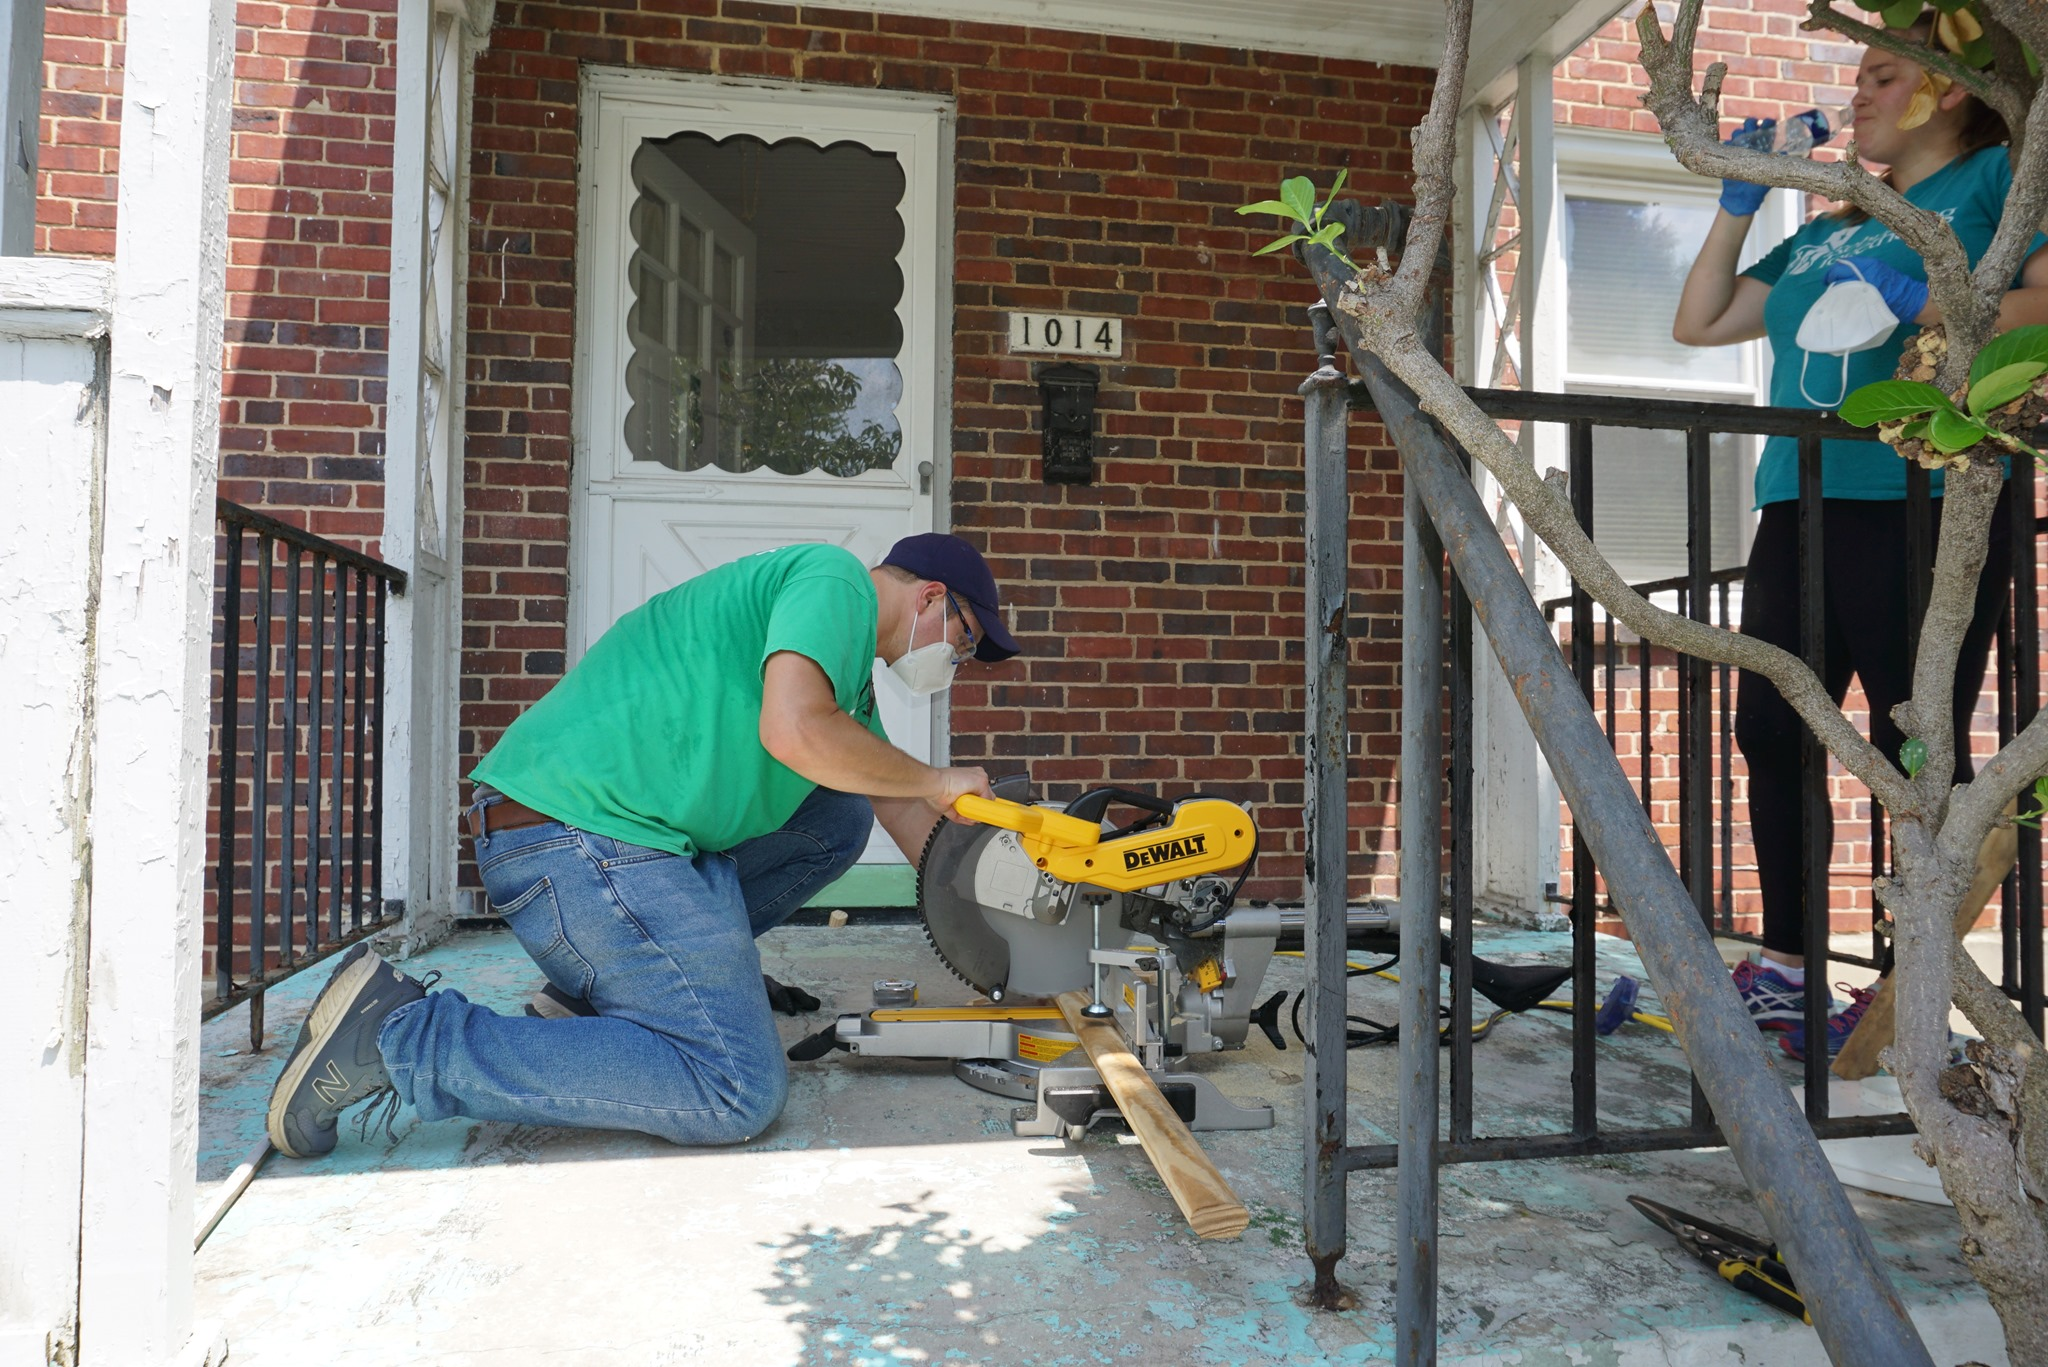 Parity: From vacant to vibrant; Plus, home repairs keep neighborhoods stable